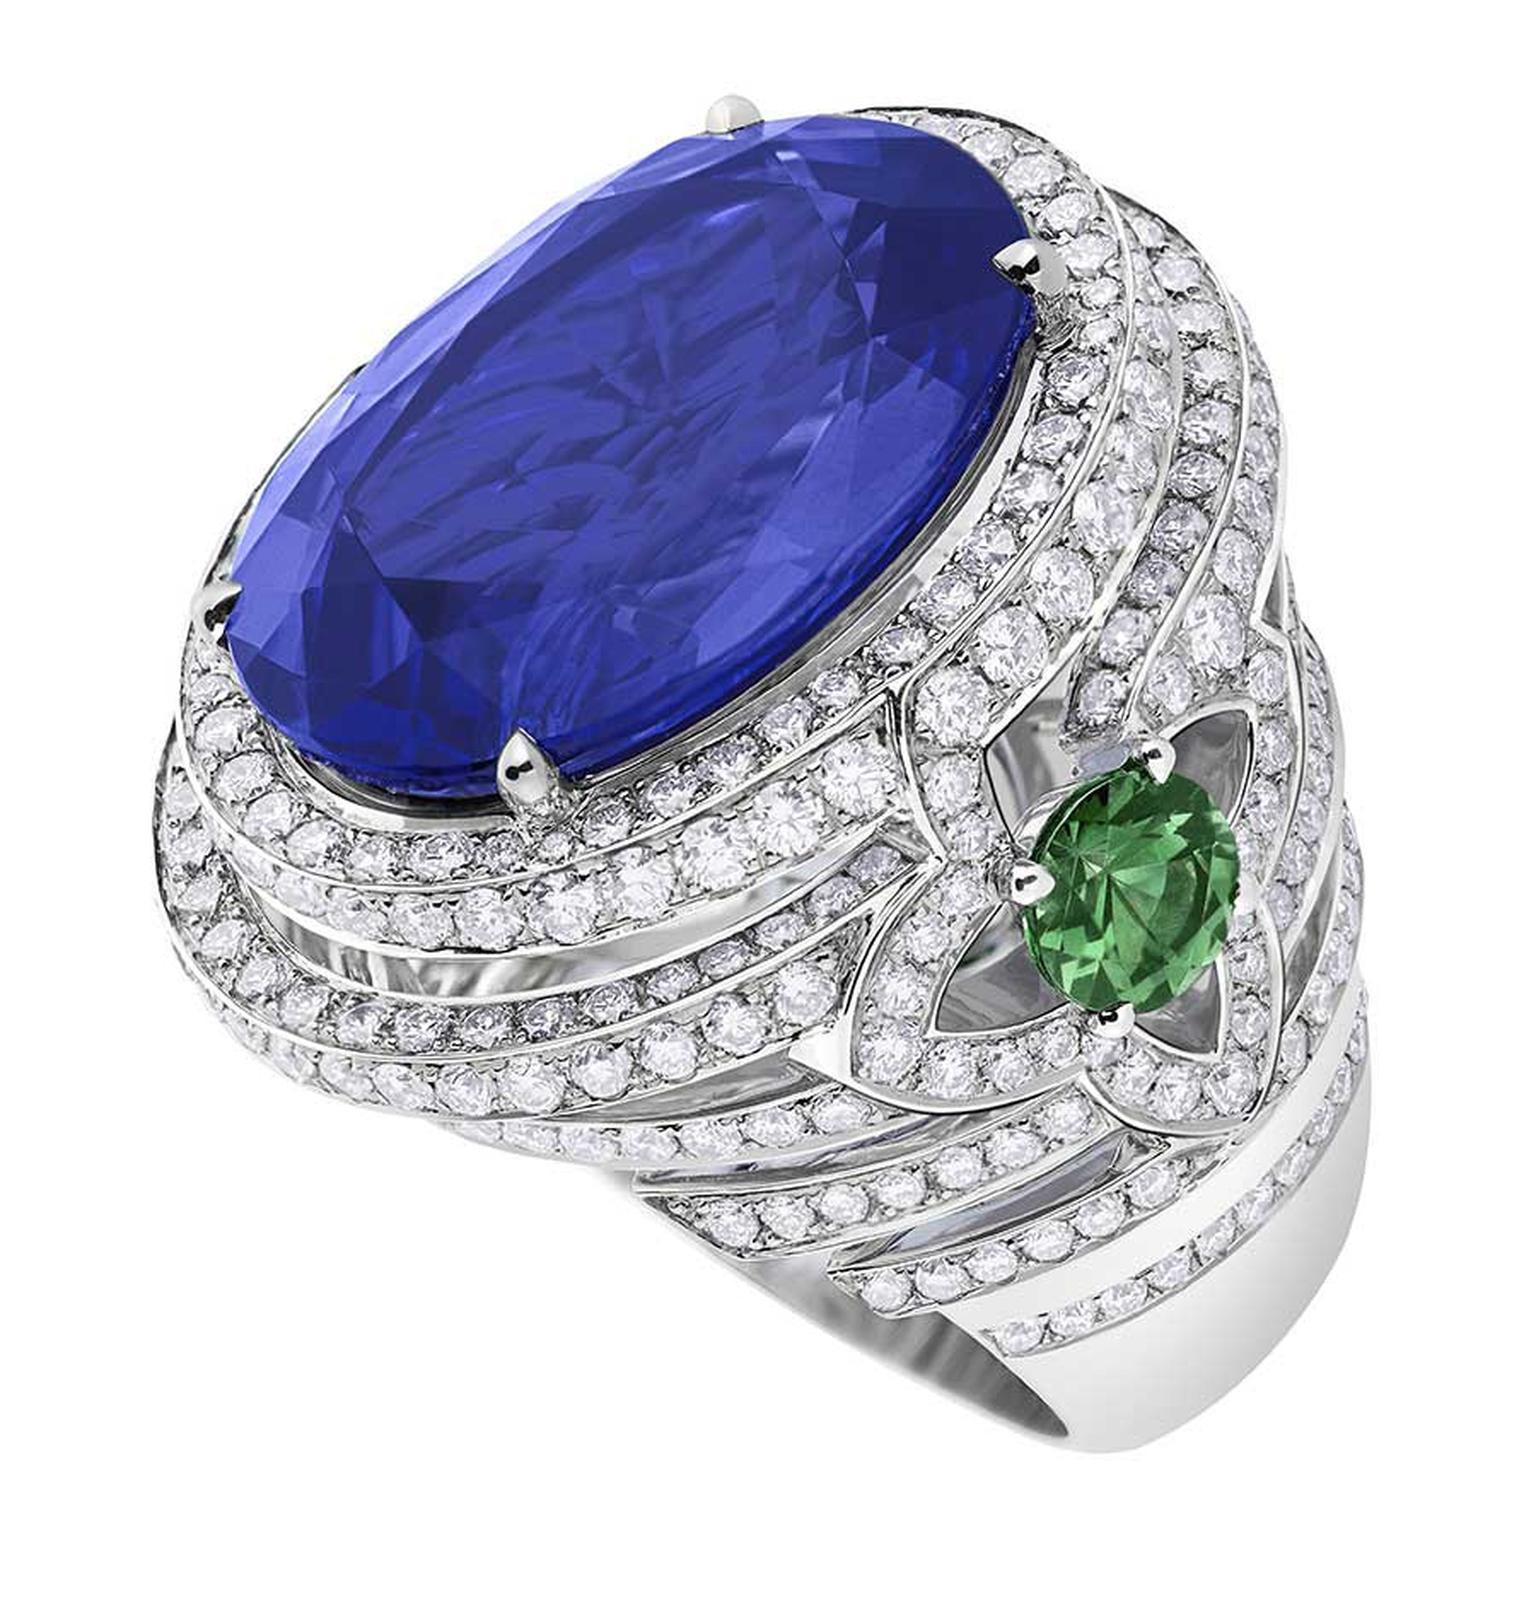 Orangerie des Tuileries ring from the Escale á Paris collection of jewels by Louis Vuitton, featuring a large central tanzanite, green tsavorites and diamonds.